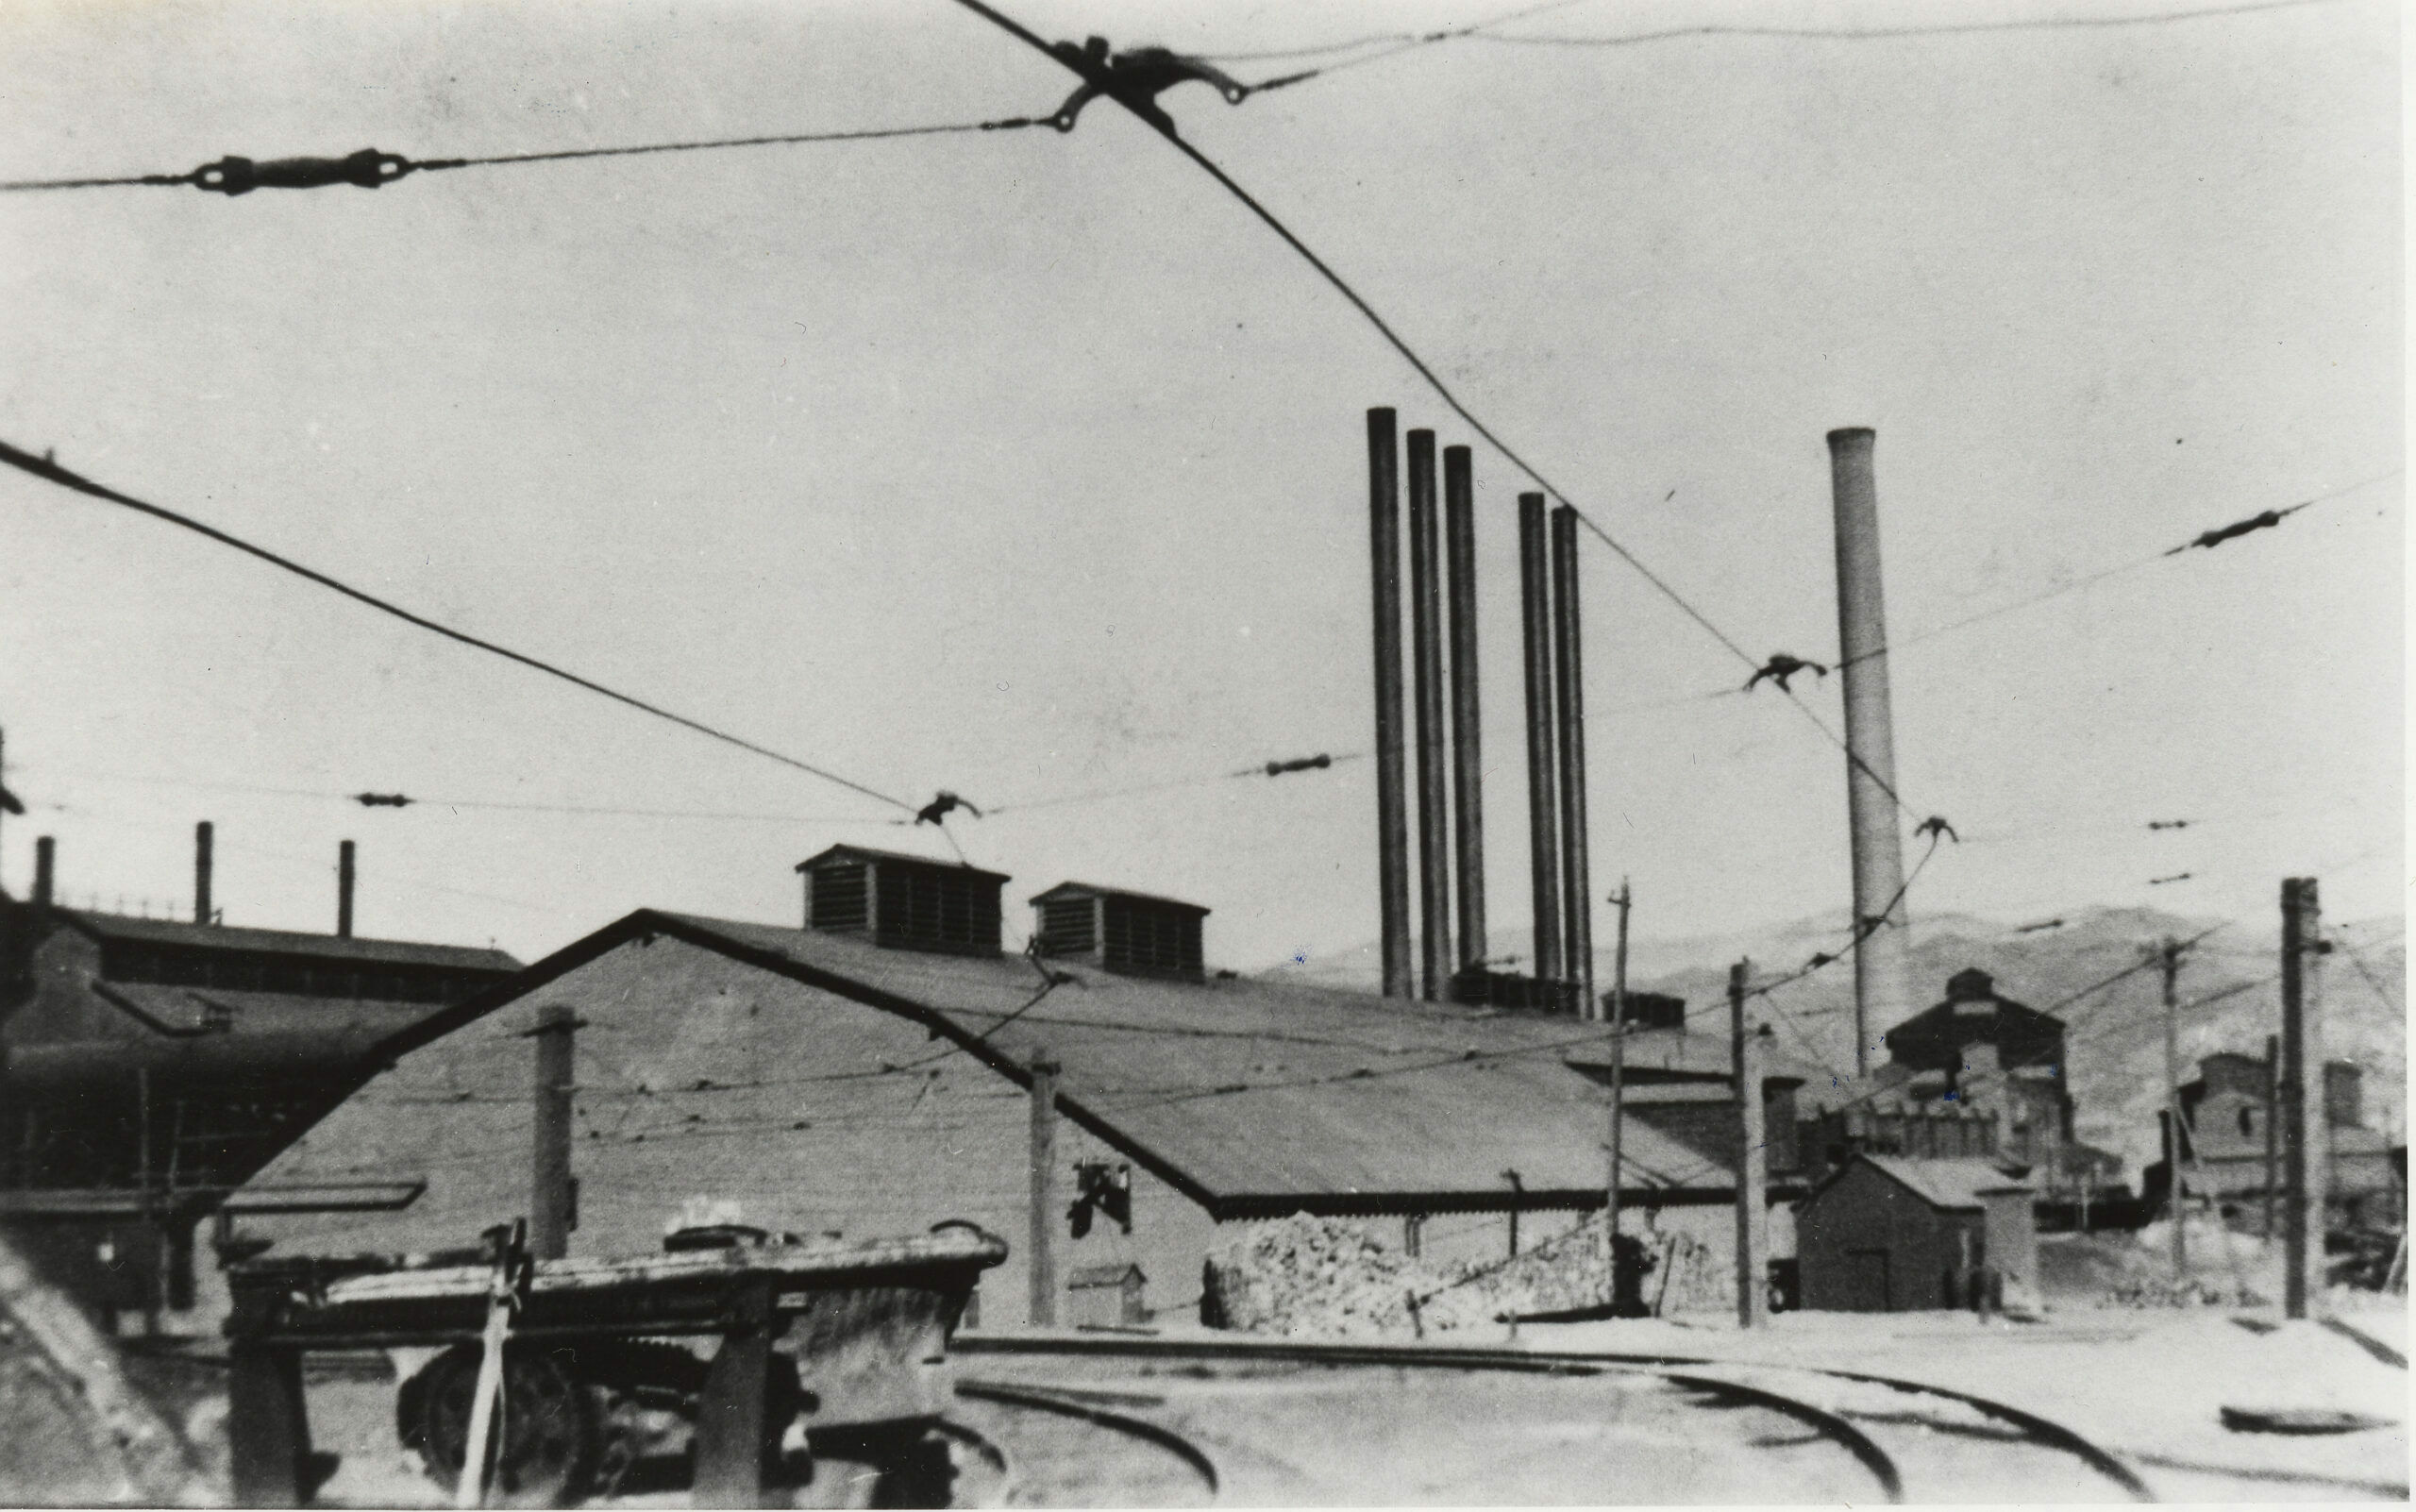 The smelter, on the slag dump looking East at the power house and the smokestack, note the center plant in front of the smokestack. The overhead cables supplied electricity. The slag engines were evidently motorized, not steam mules as in other smelters.